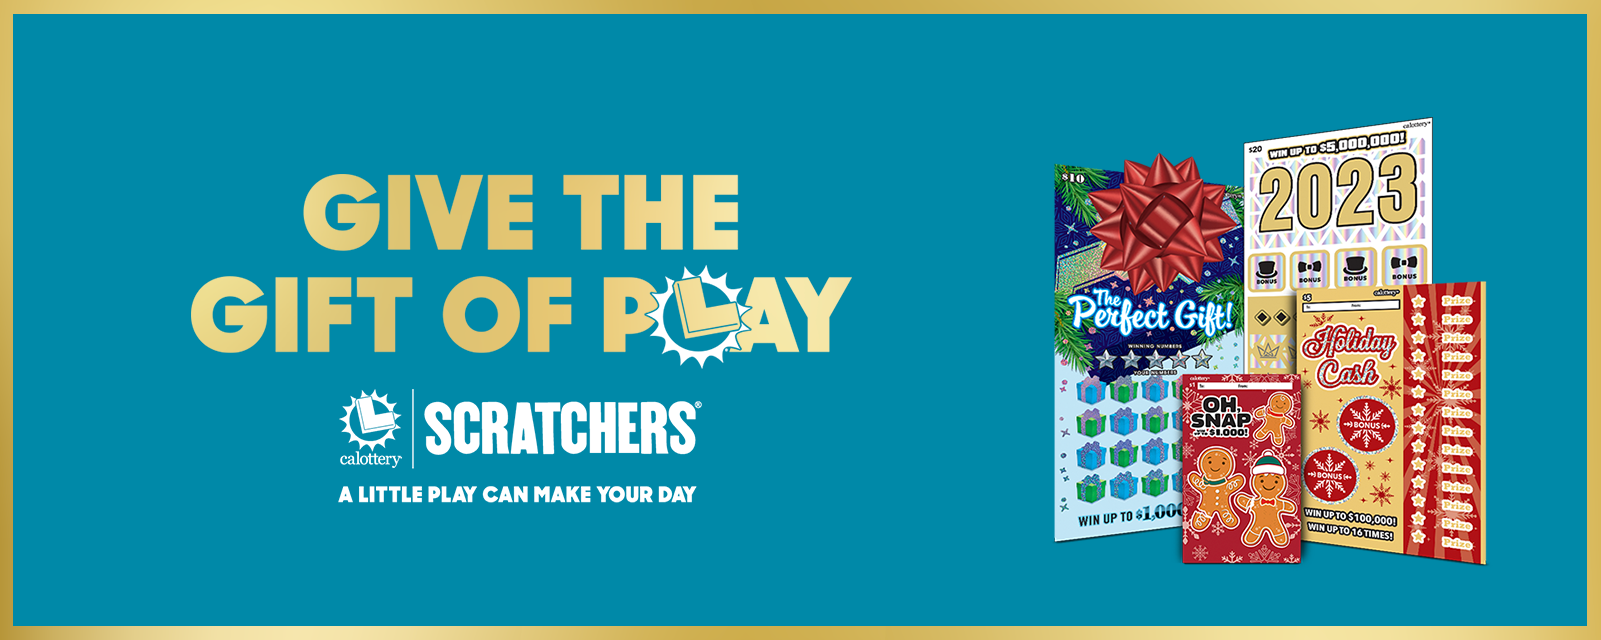 Give The Gift Of Play